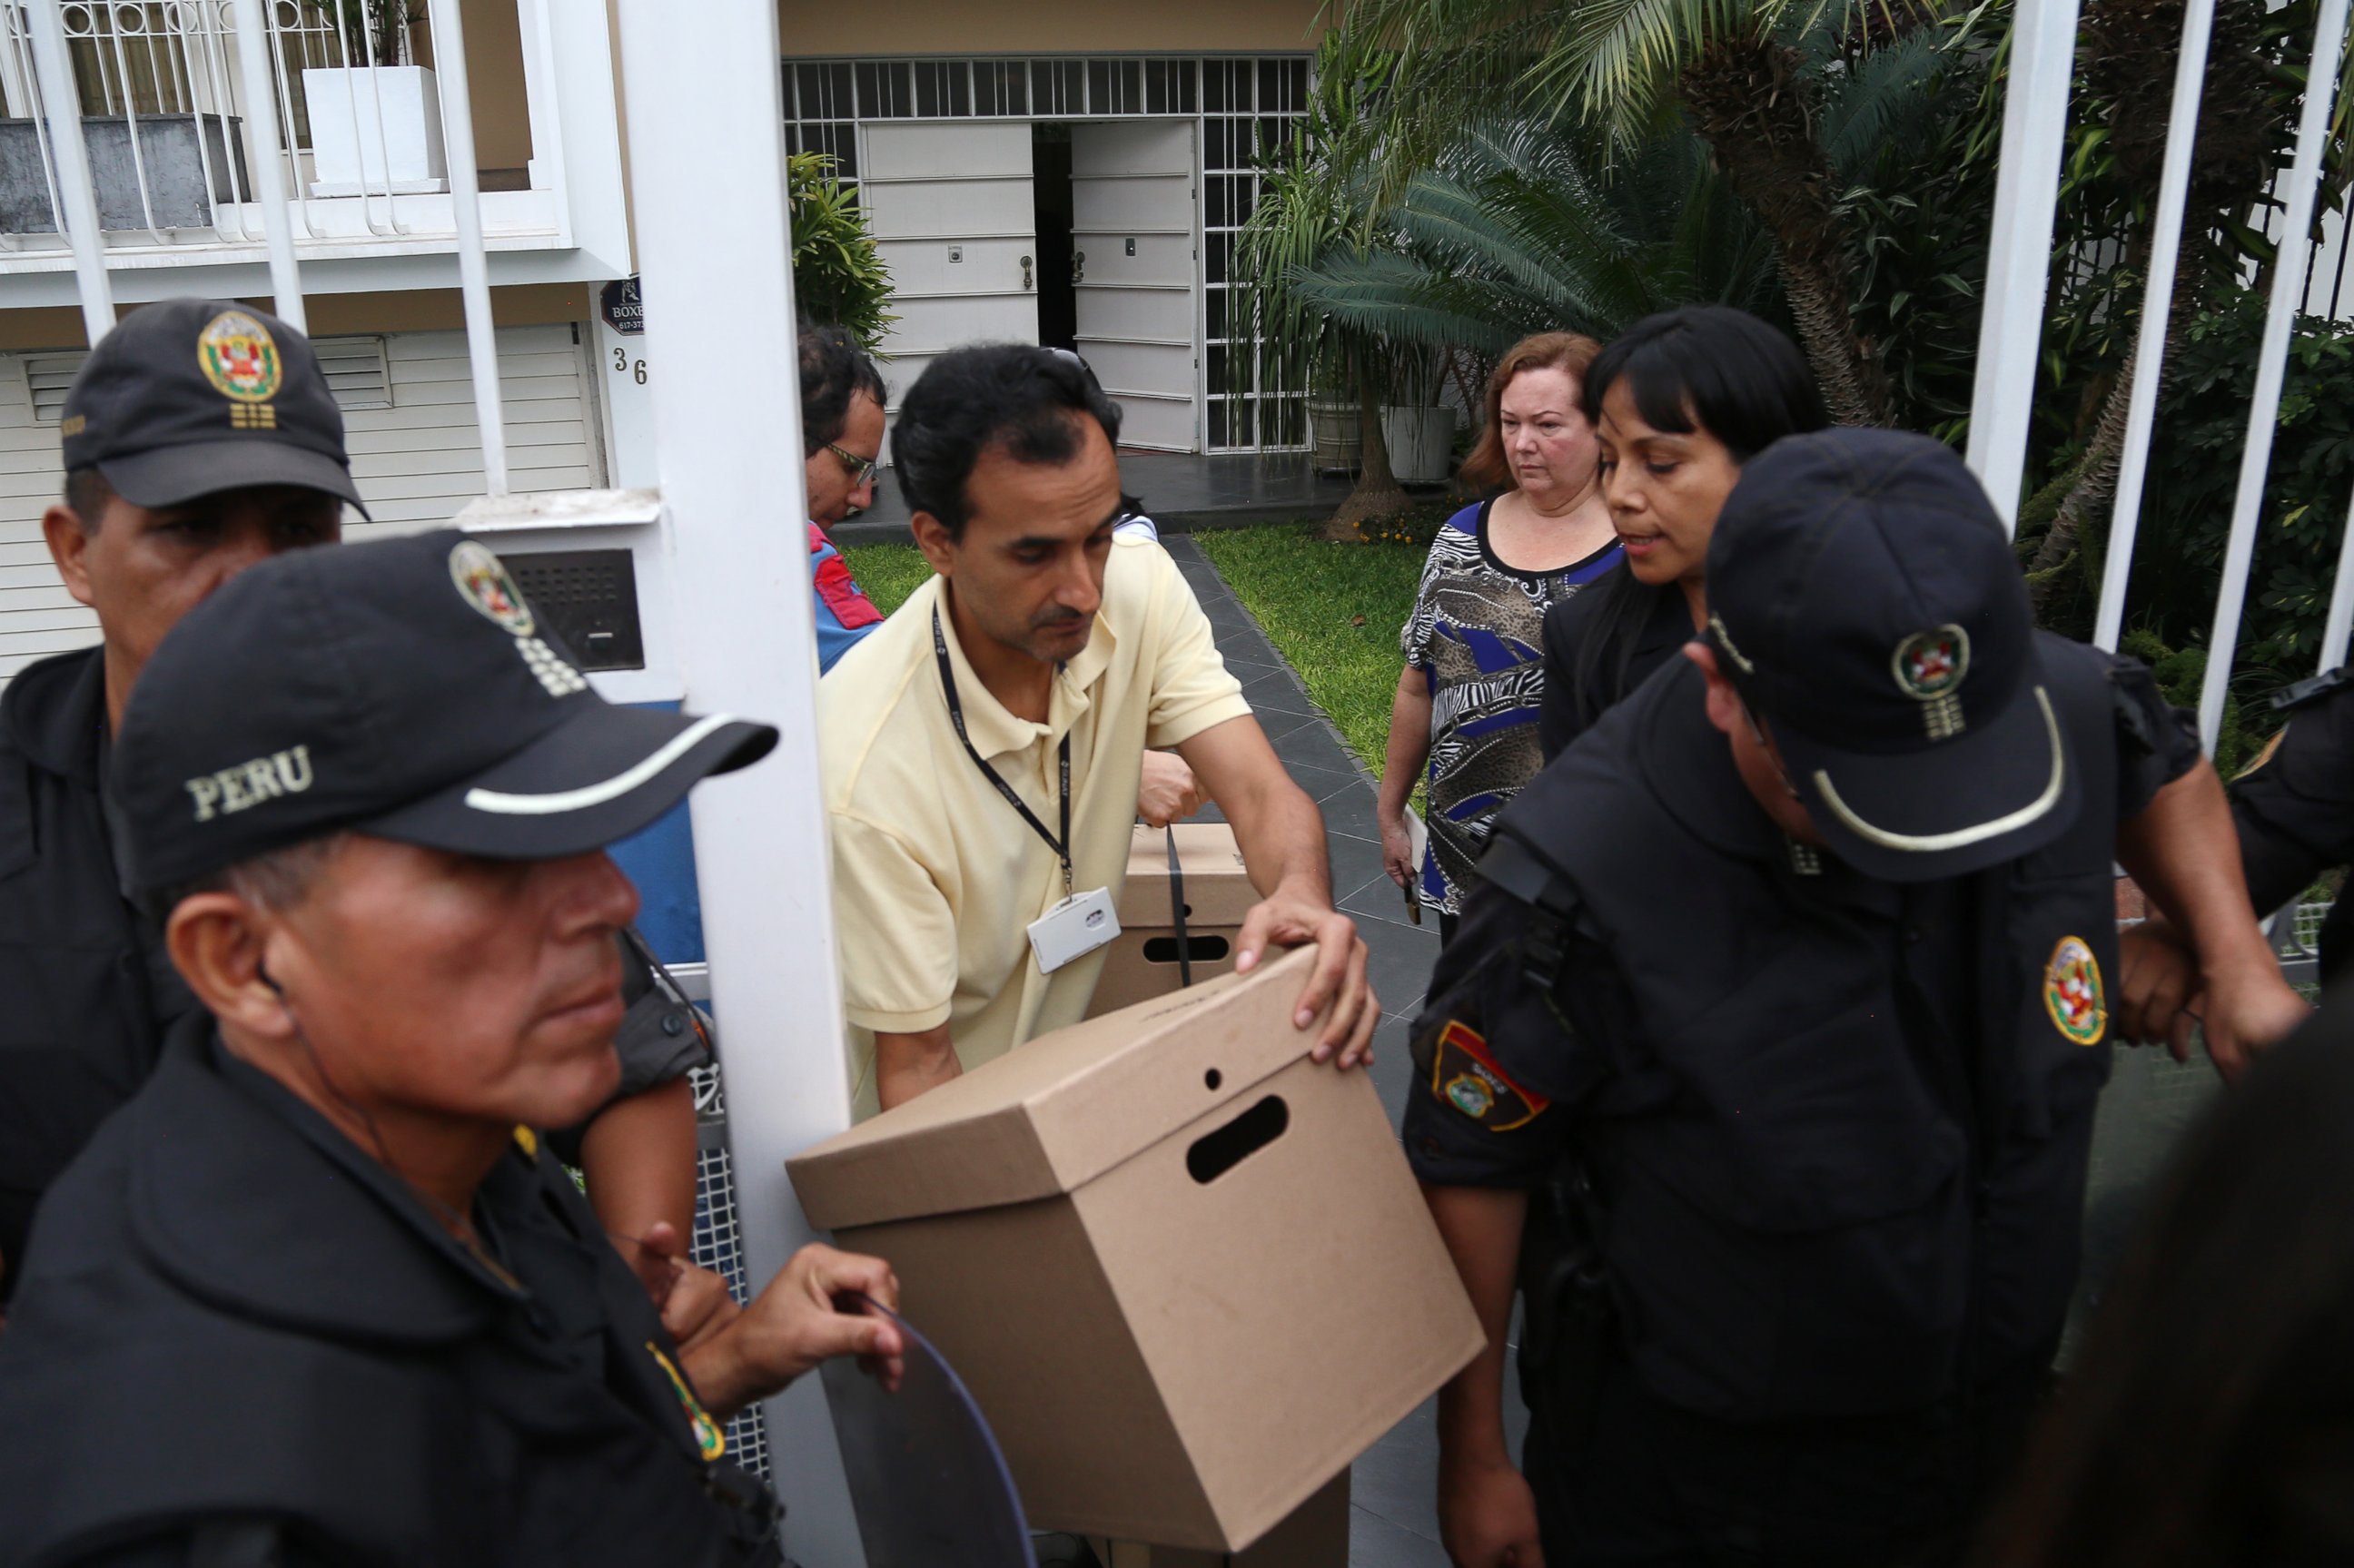 PHOTO:Tax authorities retrieve documents from the Mossack Fonseca offices escorted by police during a raid in Lima on April 11, 2016. Peruvian authorities raided a branch of Mossack Fonseca in Lima.